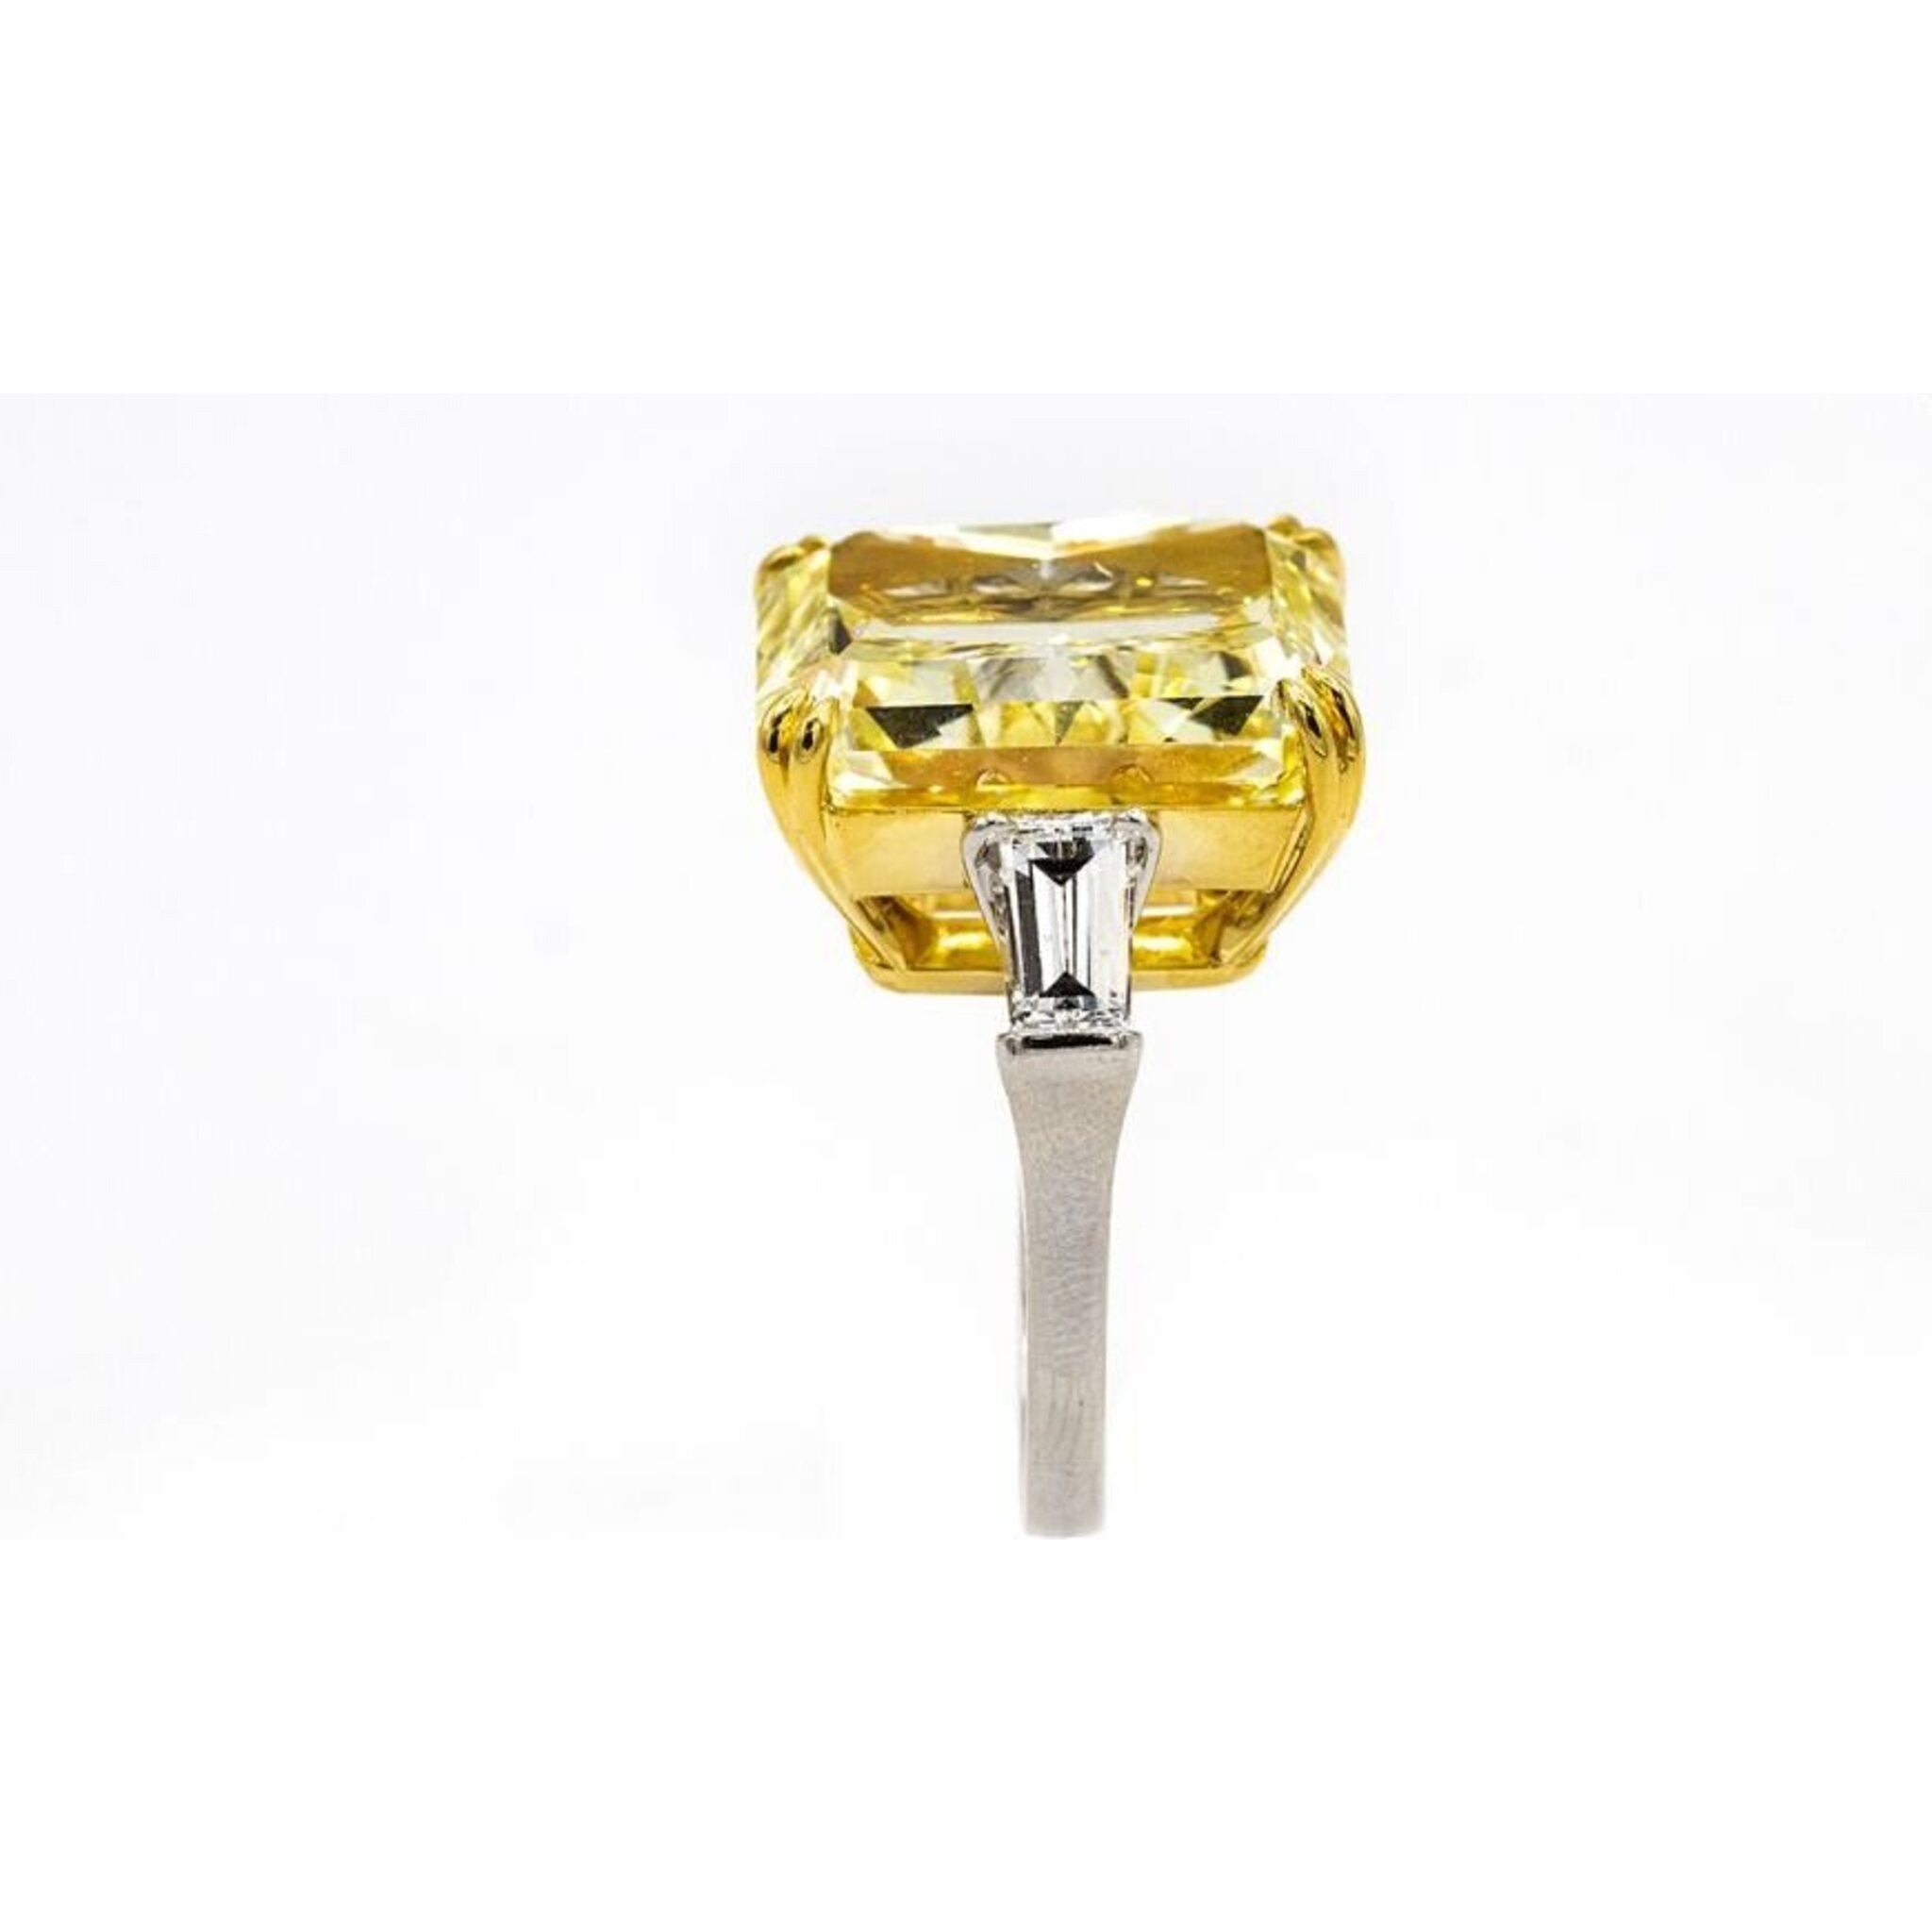 20 Carat Emerald Ring in 14kt Yellow Gold | Ross-Simons